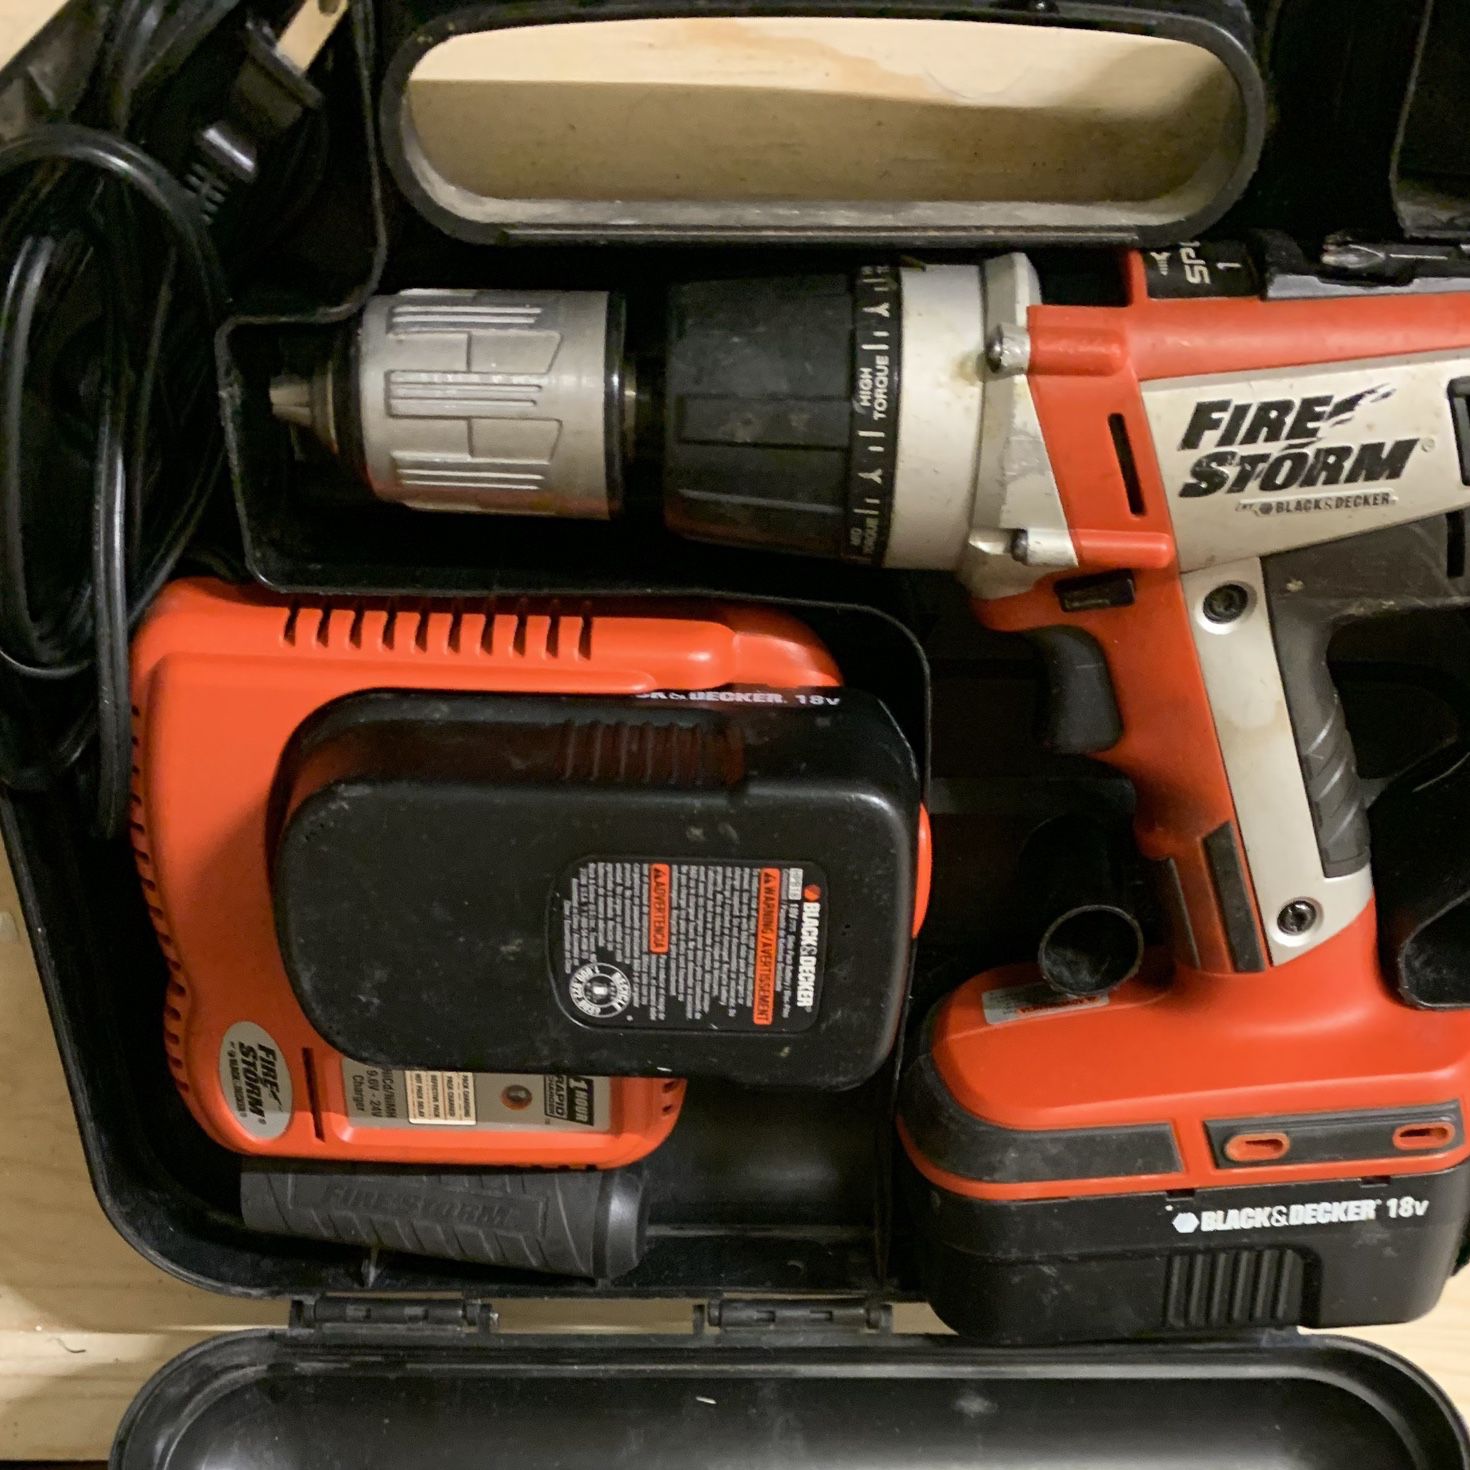 Brand New Black and Decker Firestorm 18V Radio Charger for Sale in  Carlisle, PA - OfferUp